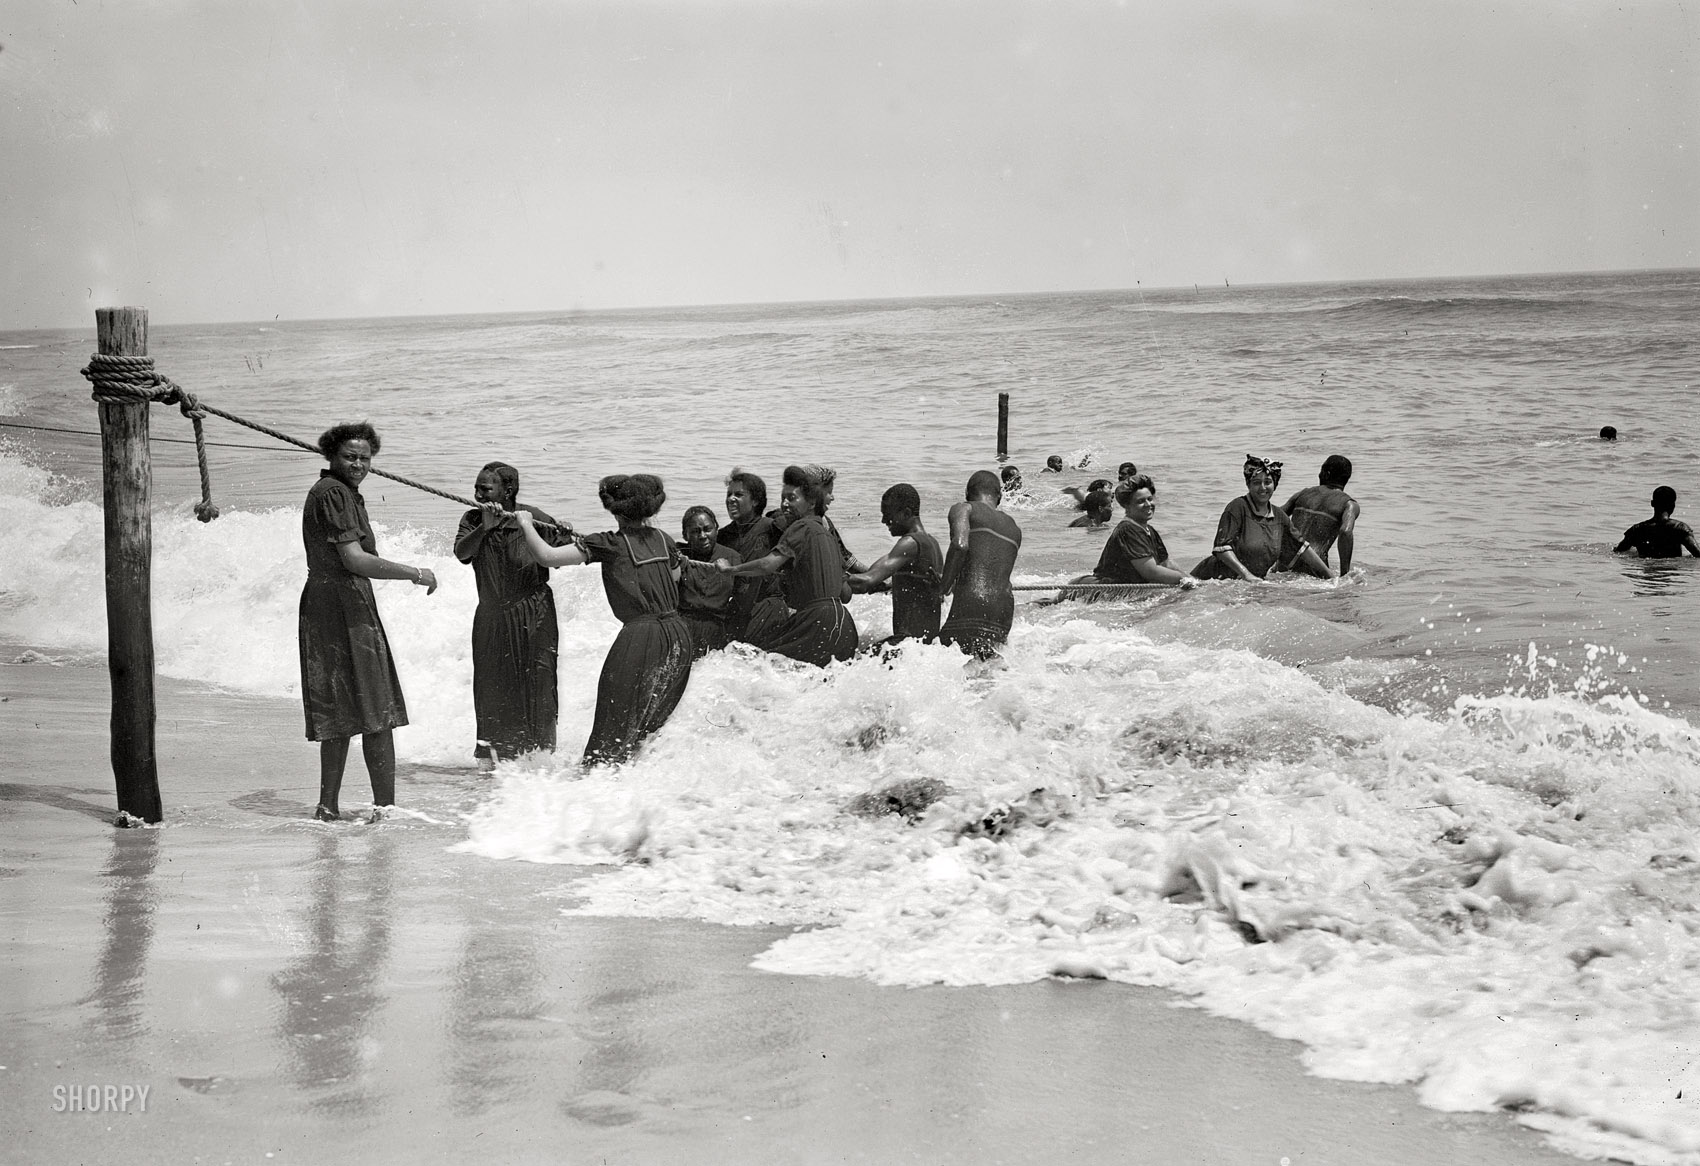 July 19, 1908. "Negro bathers, Asbury Park." A frolic in the New Jersey surf. 5x7 glass negative, George Grantham Bain Collection. View full size.